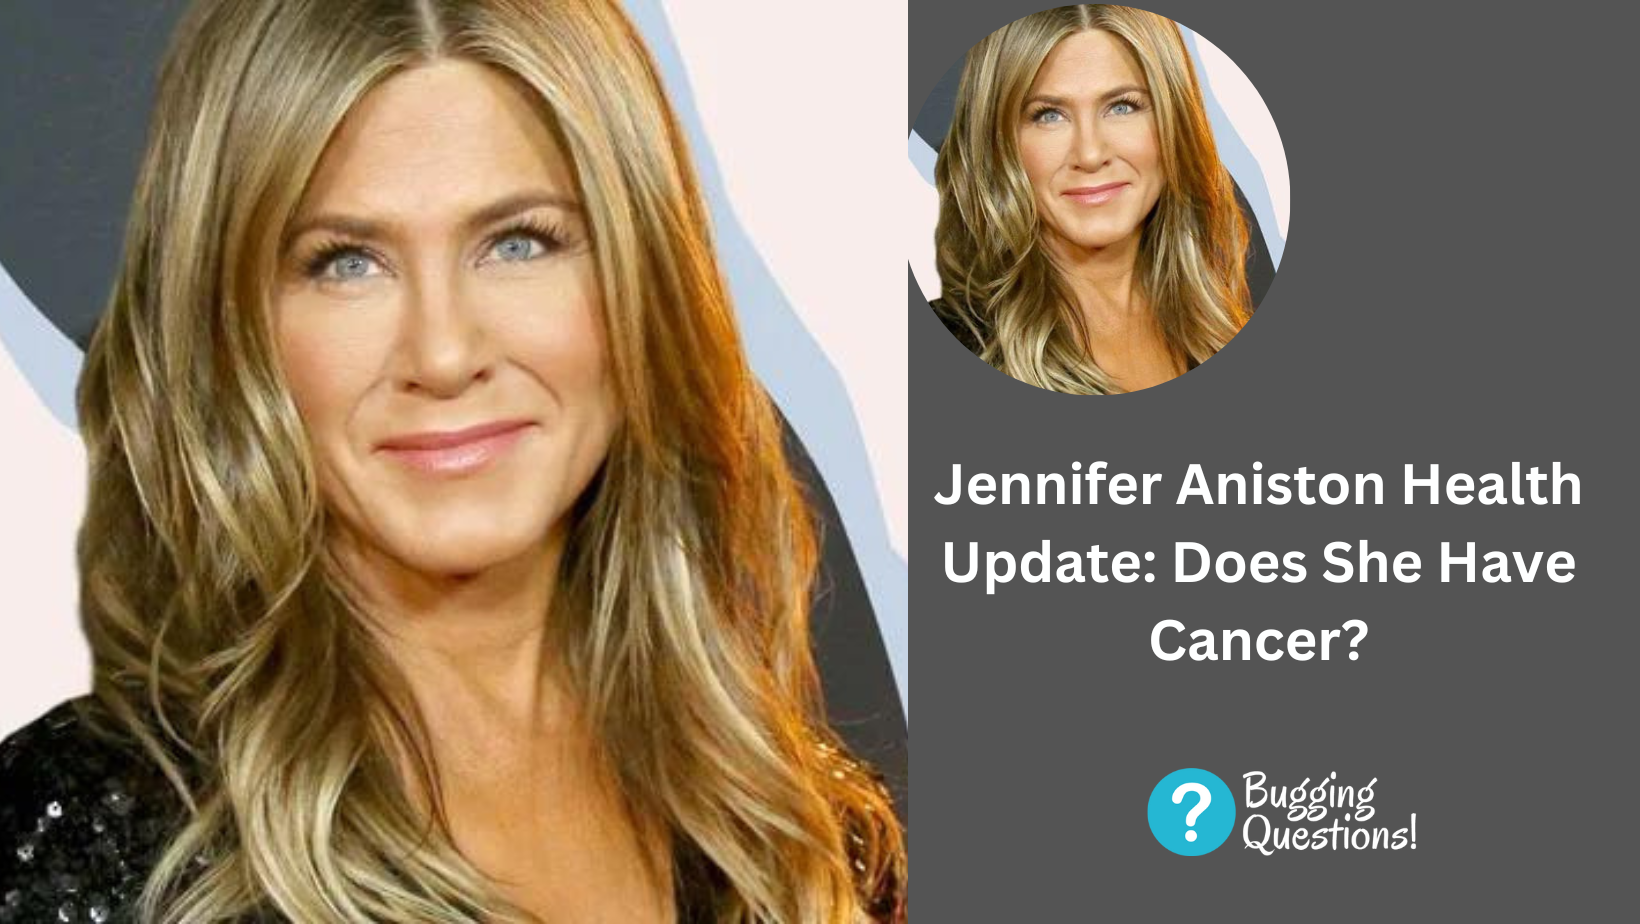 Jennifer Aniston Health Update: Does She Have Cancer?